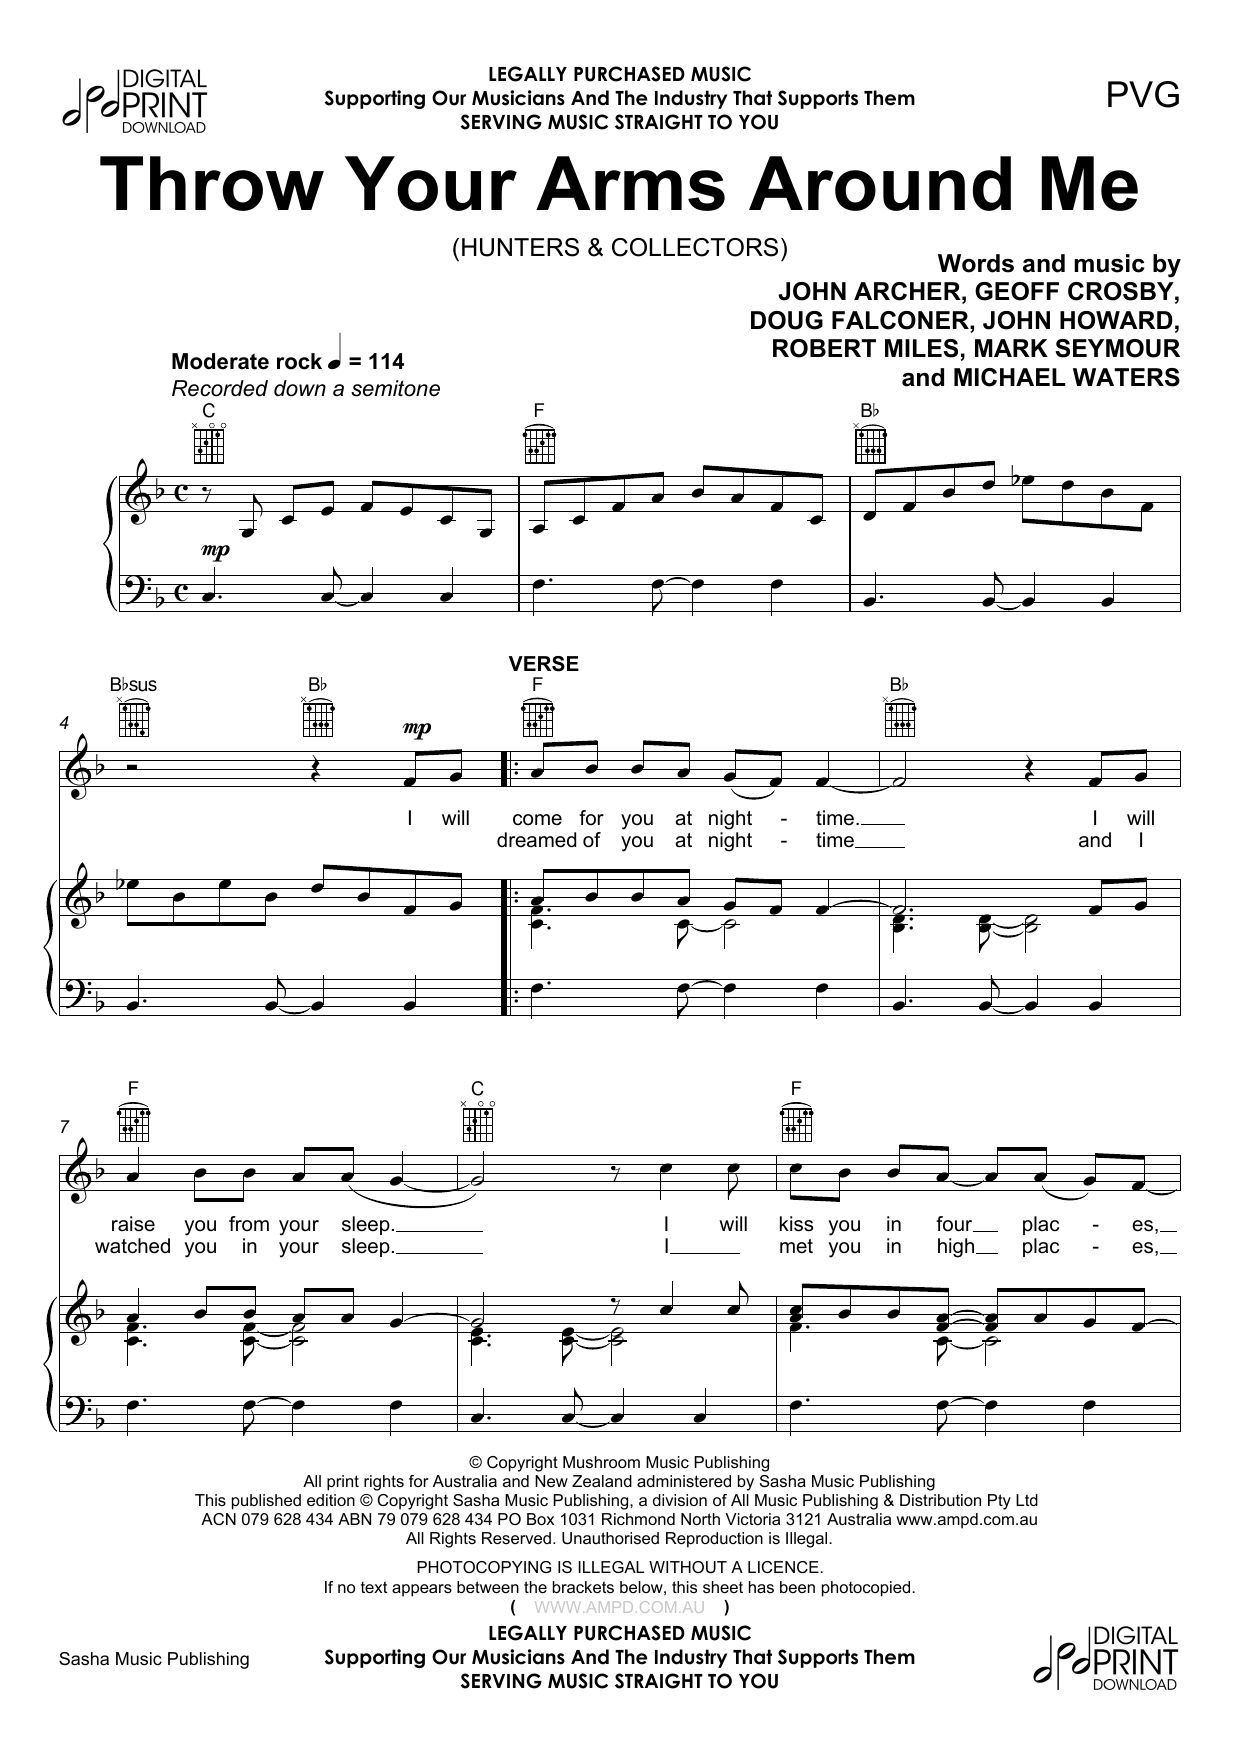 Download Hunters & Collectors Throw Your Arms Around Me Sheet Music